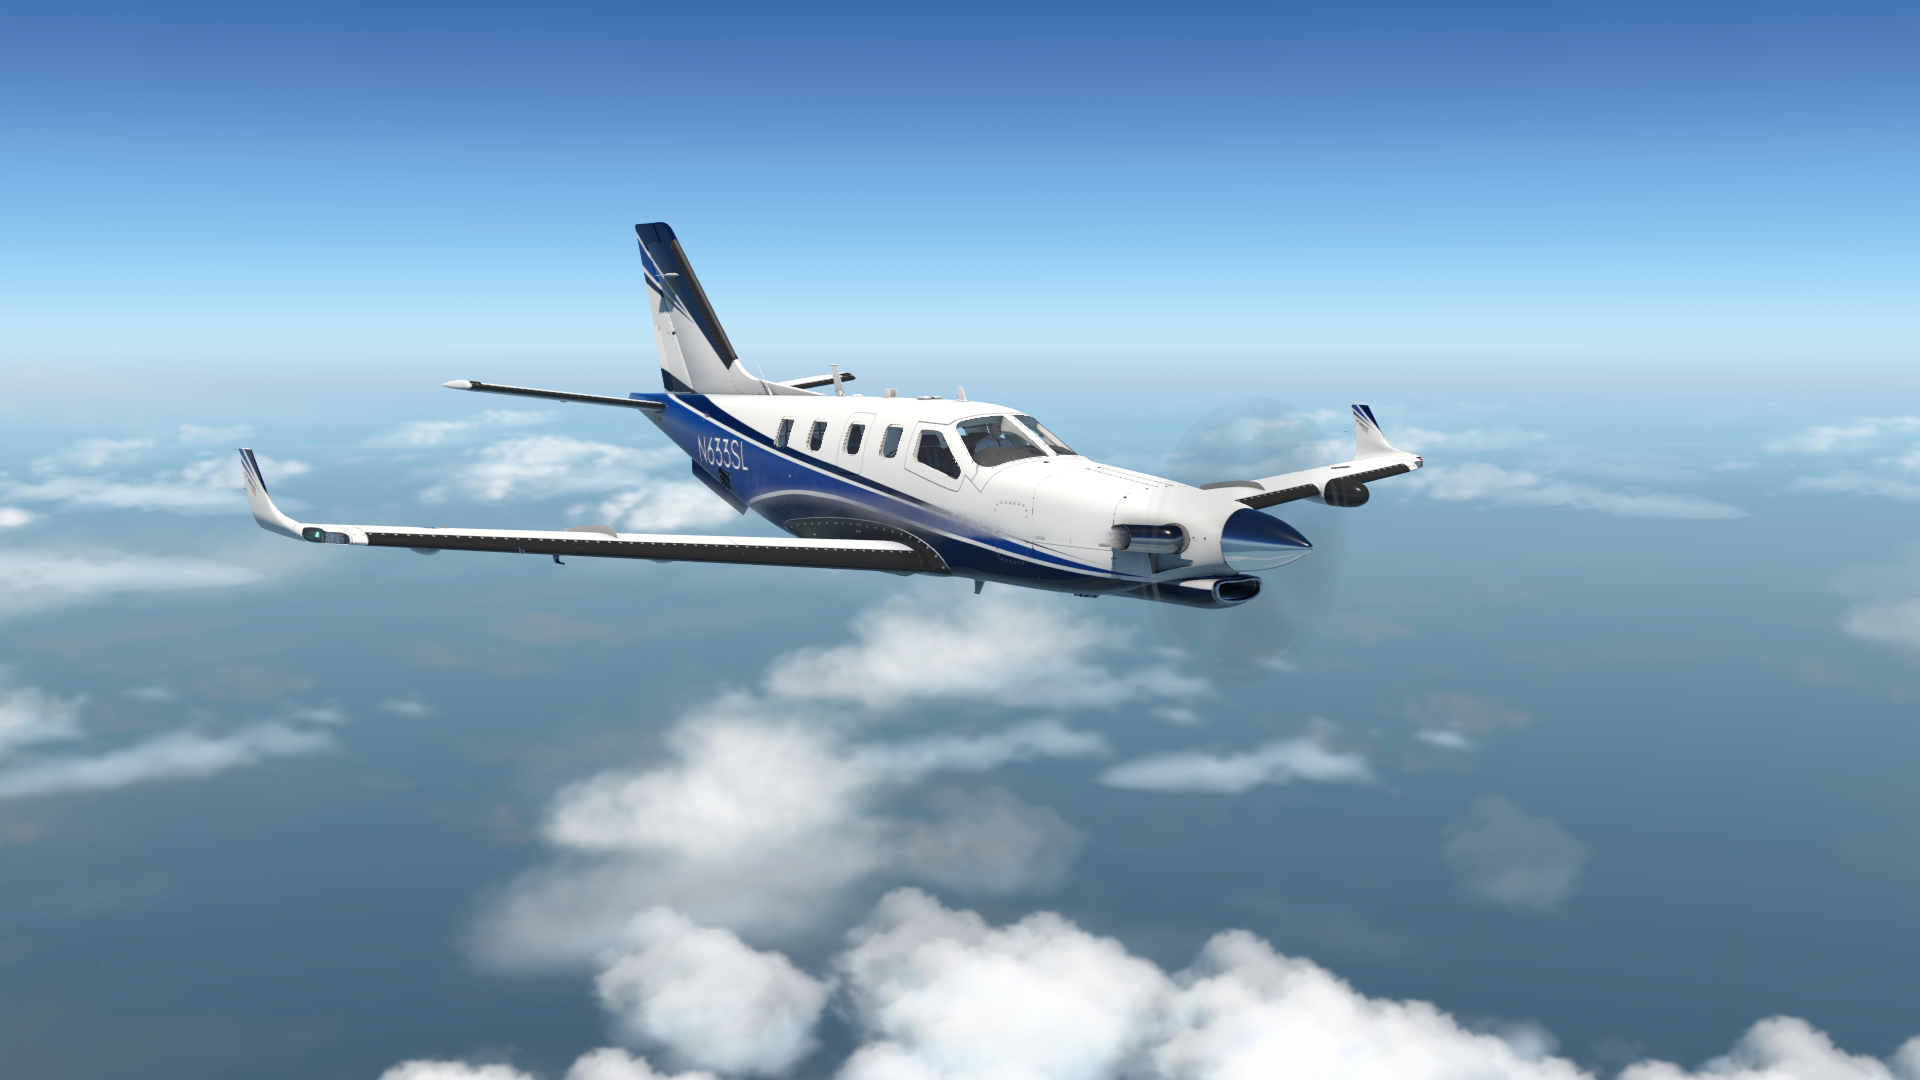 The newest addition to the fleet. TBM-900 at FL290 enroute to MDCY from KSRQ. This is an amazing aircraft for X-Plane. Absolutely love this airframe. 